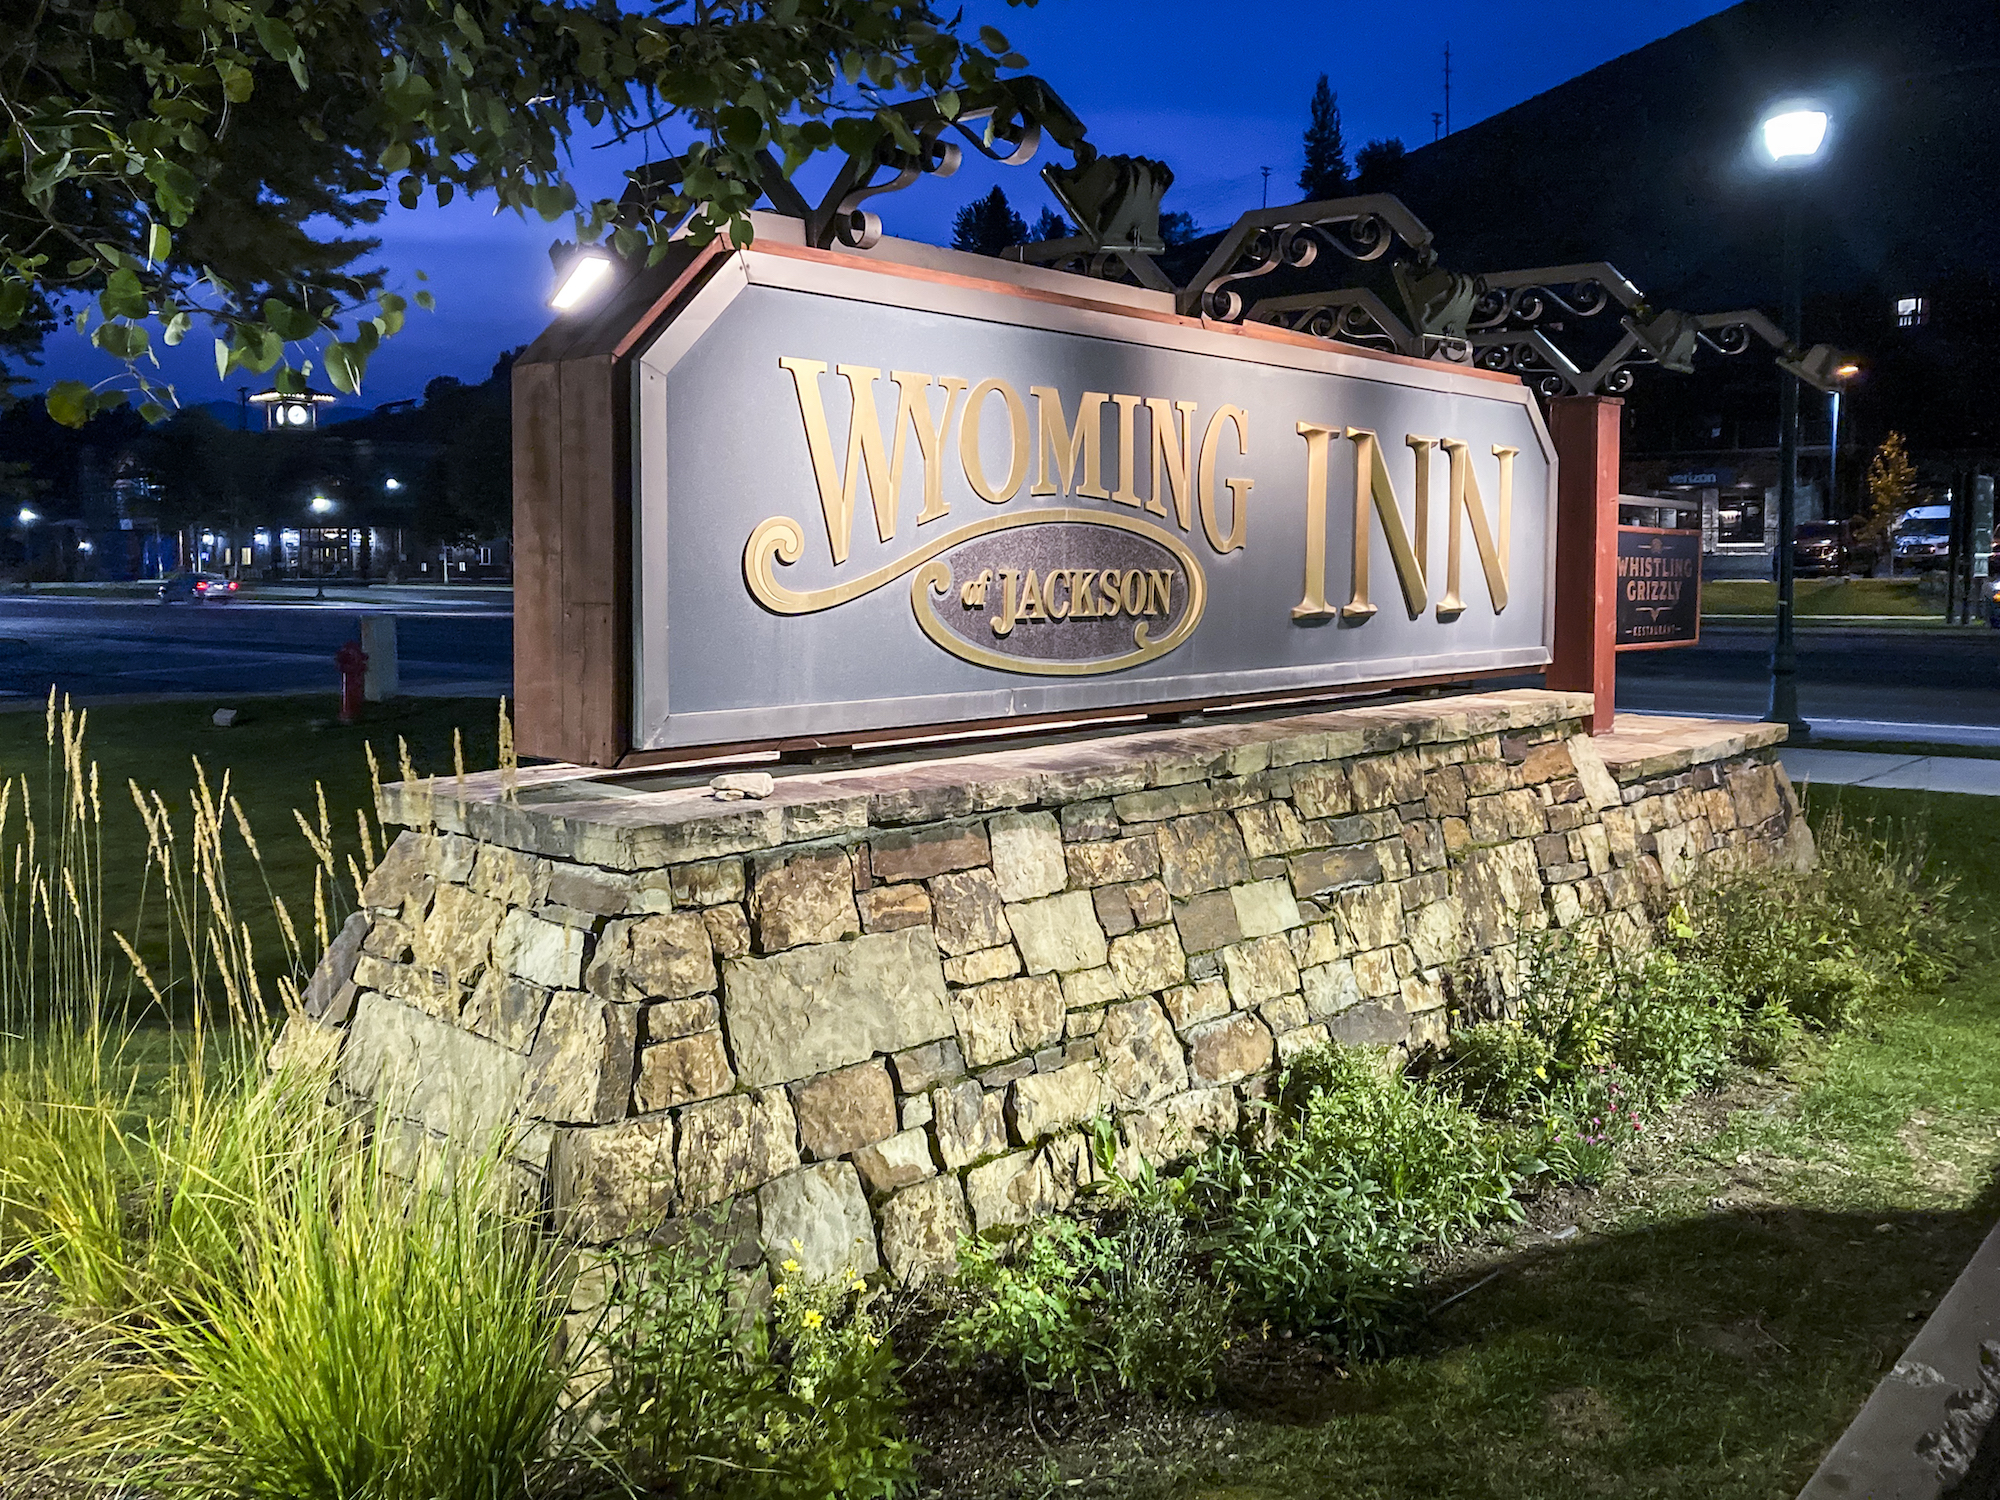 night view of the inns sign